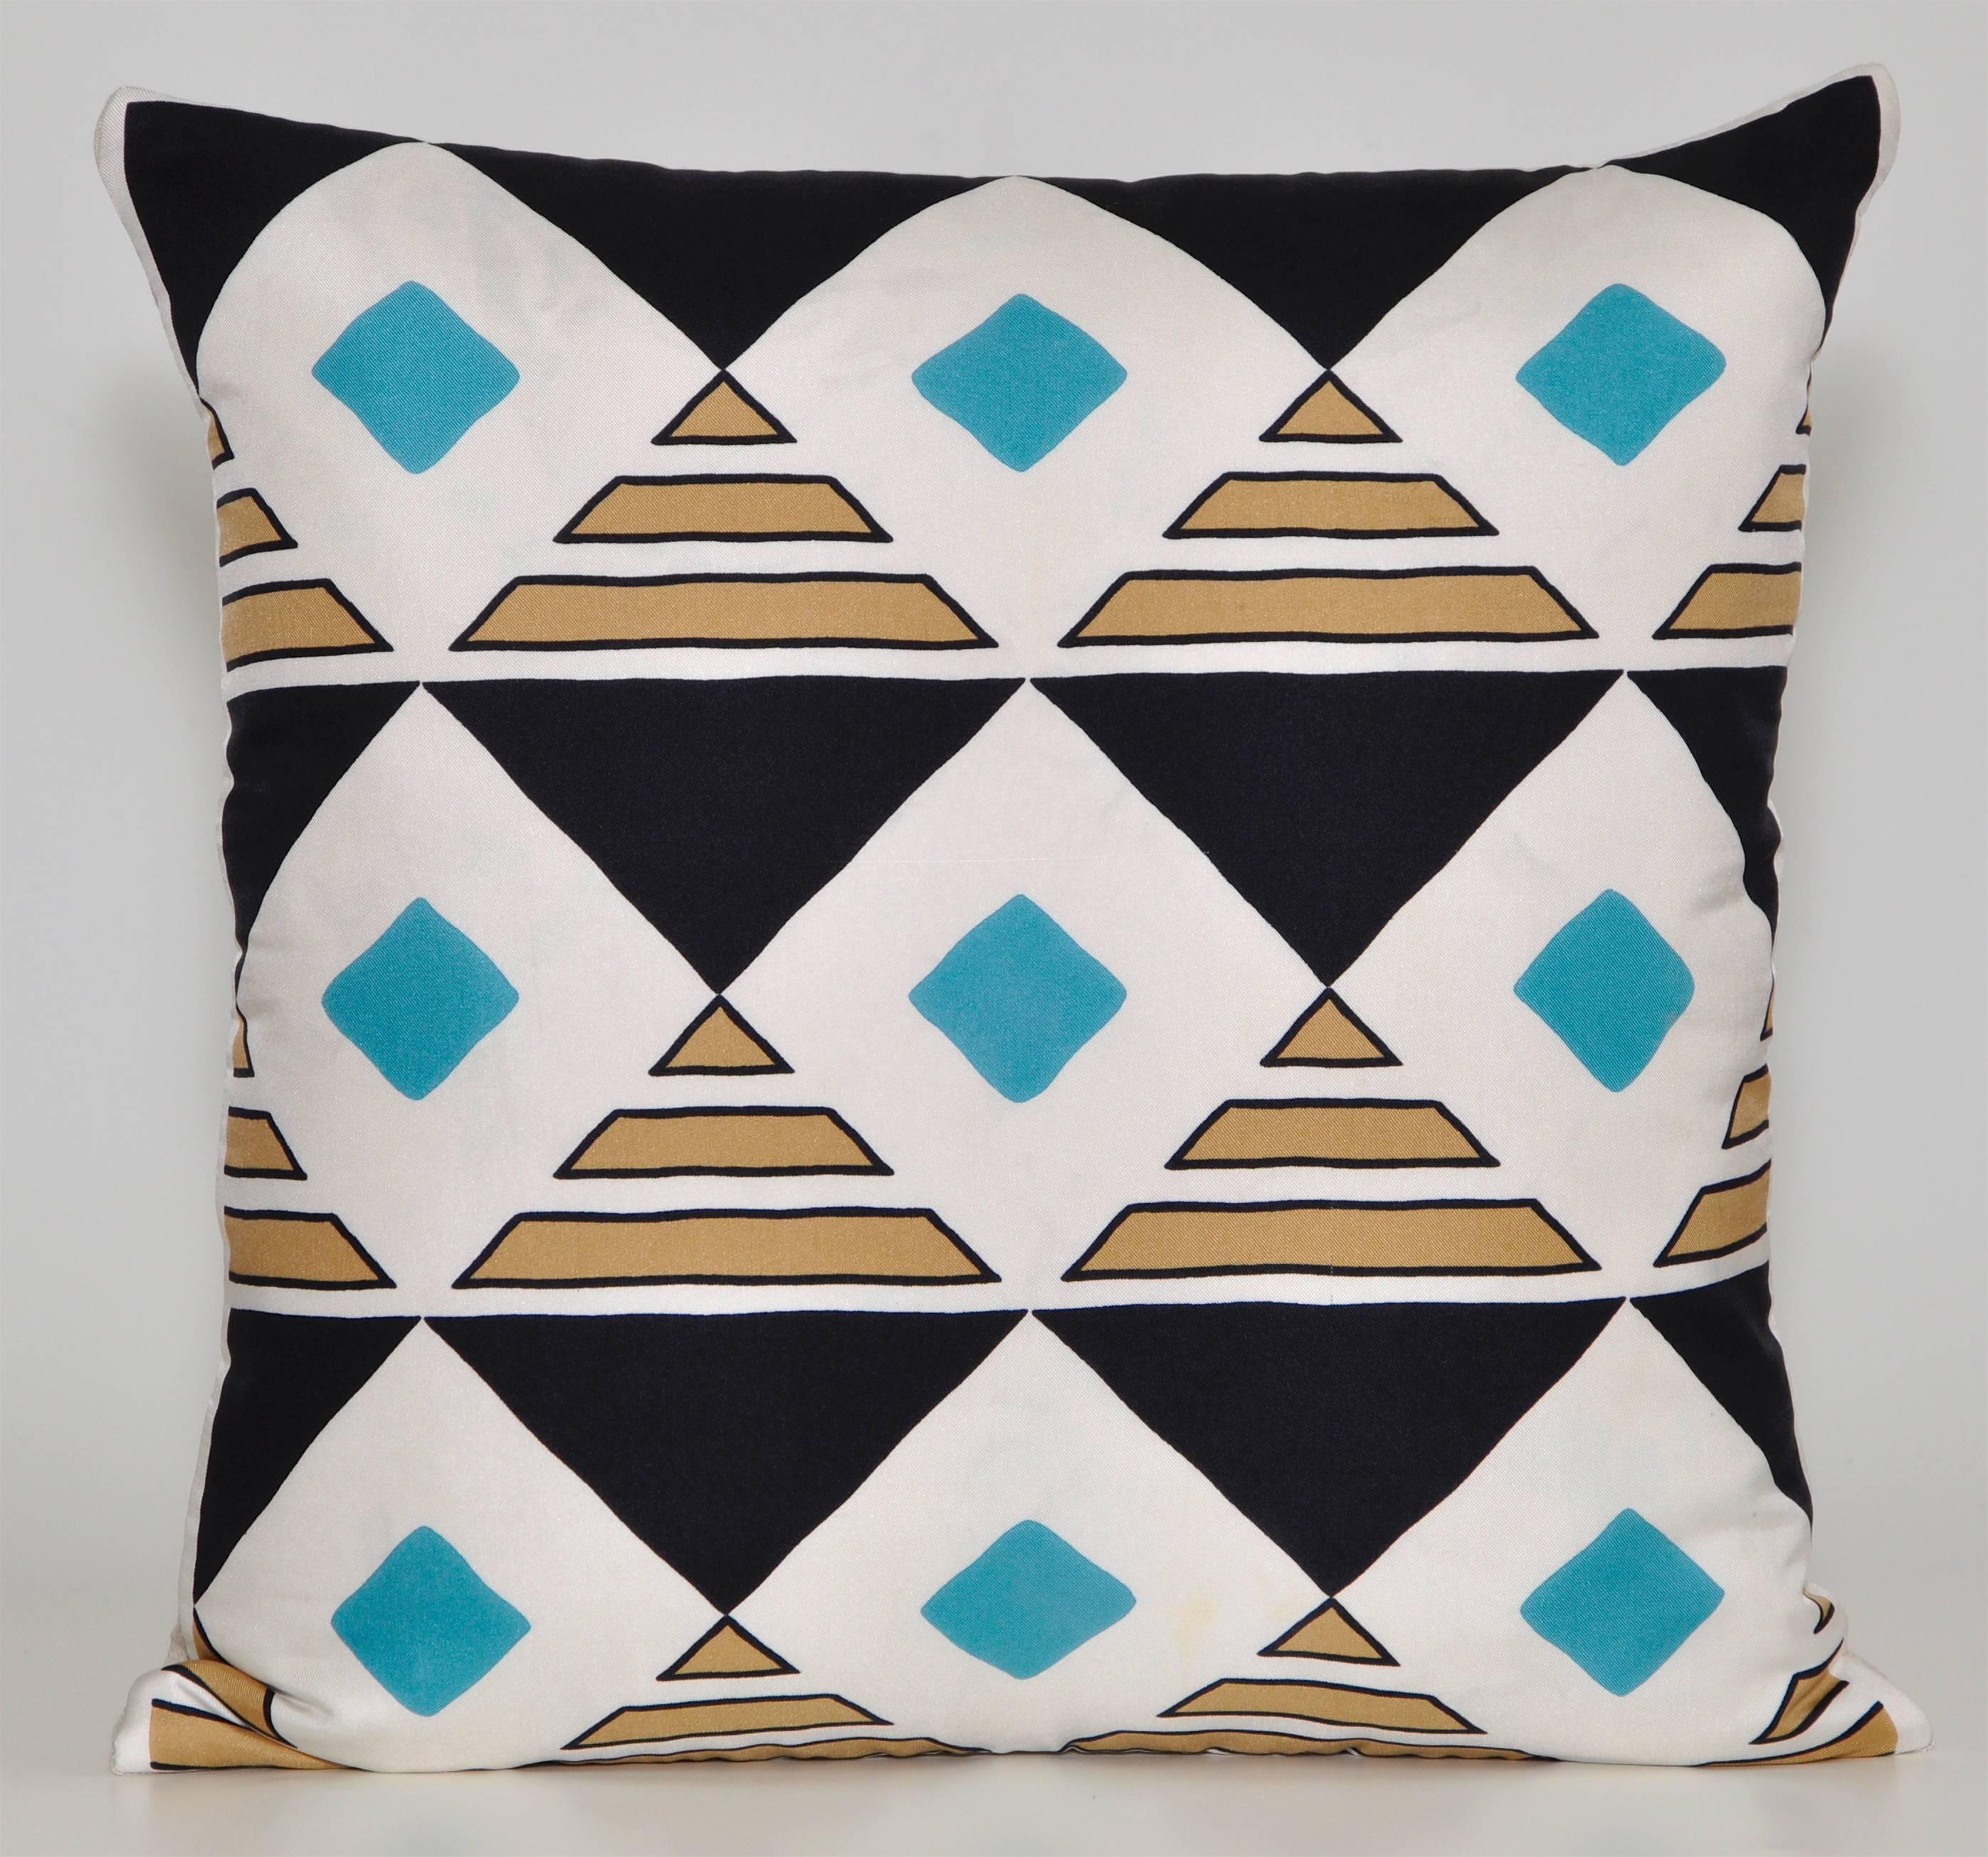 Custom-made pair of cushion created from a rare vintage silk Jacques Heim fashion scarf in a striking turquoise, white and black geometric pattern. Parisian born designer Jacques Heim began as a furrier in the 1920s in his parents' fur business,